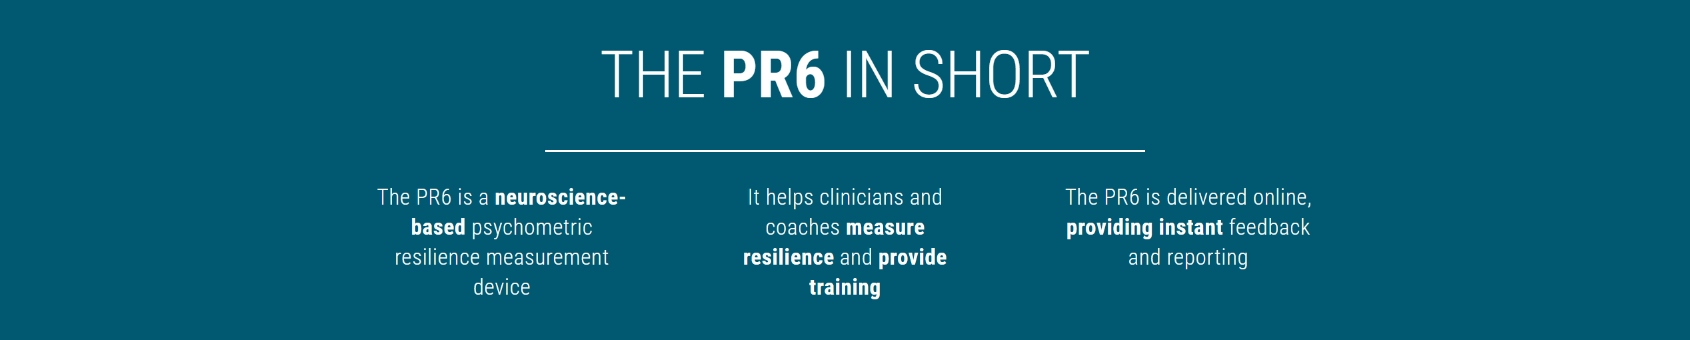 PR6 Resilience Assessment,Certification & Training t Talent Tools